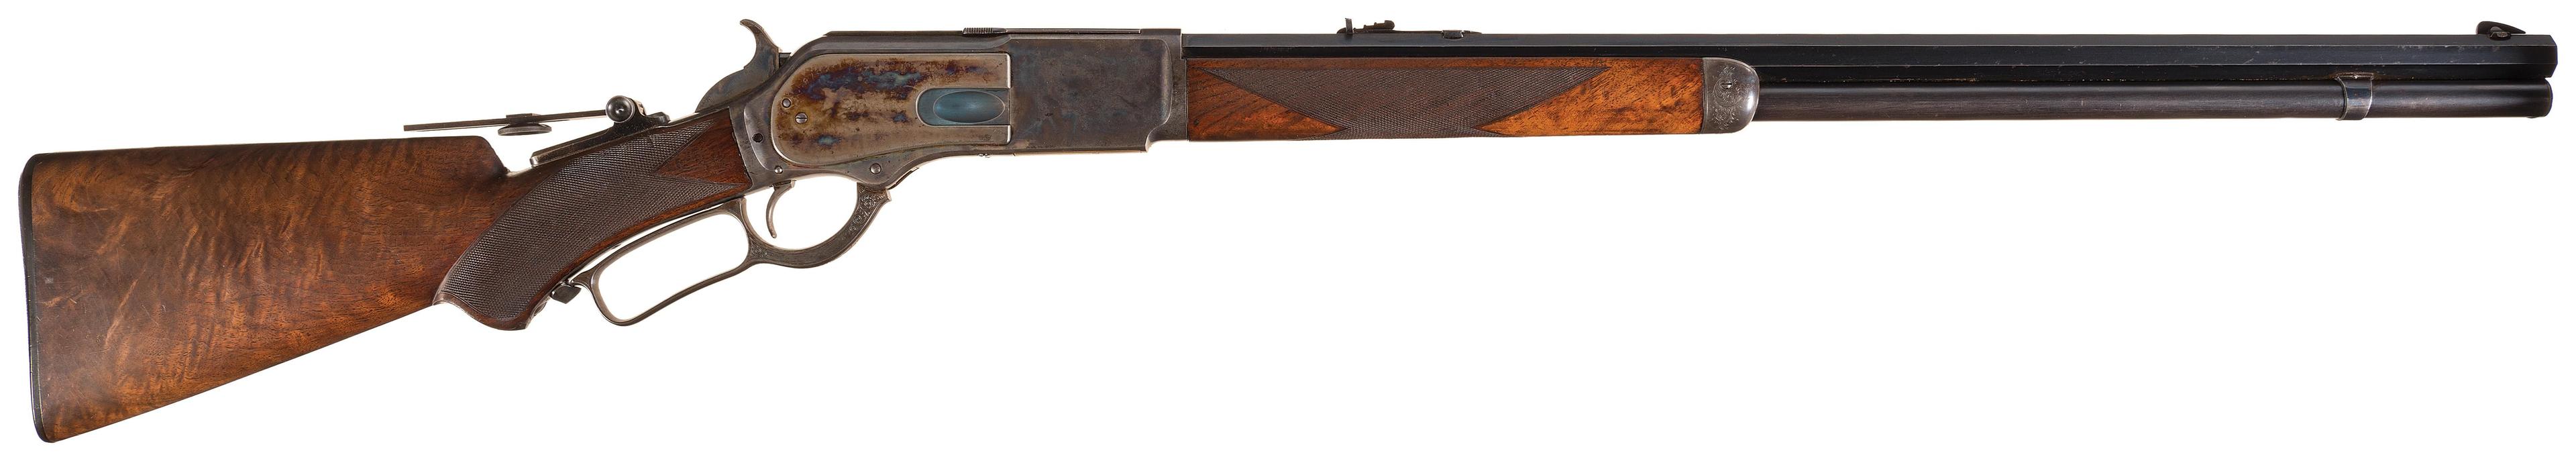 Special Order Engraved Winchester Model 1876 50 Express Rifle